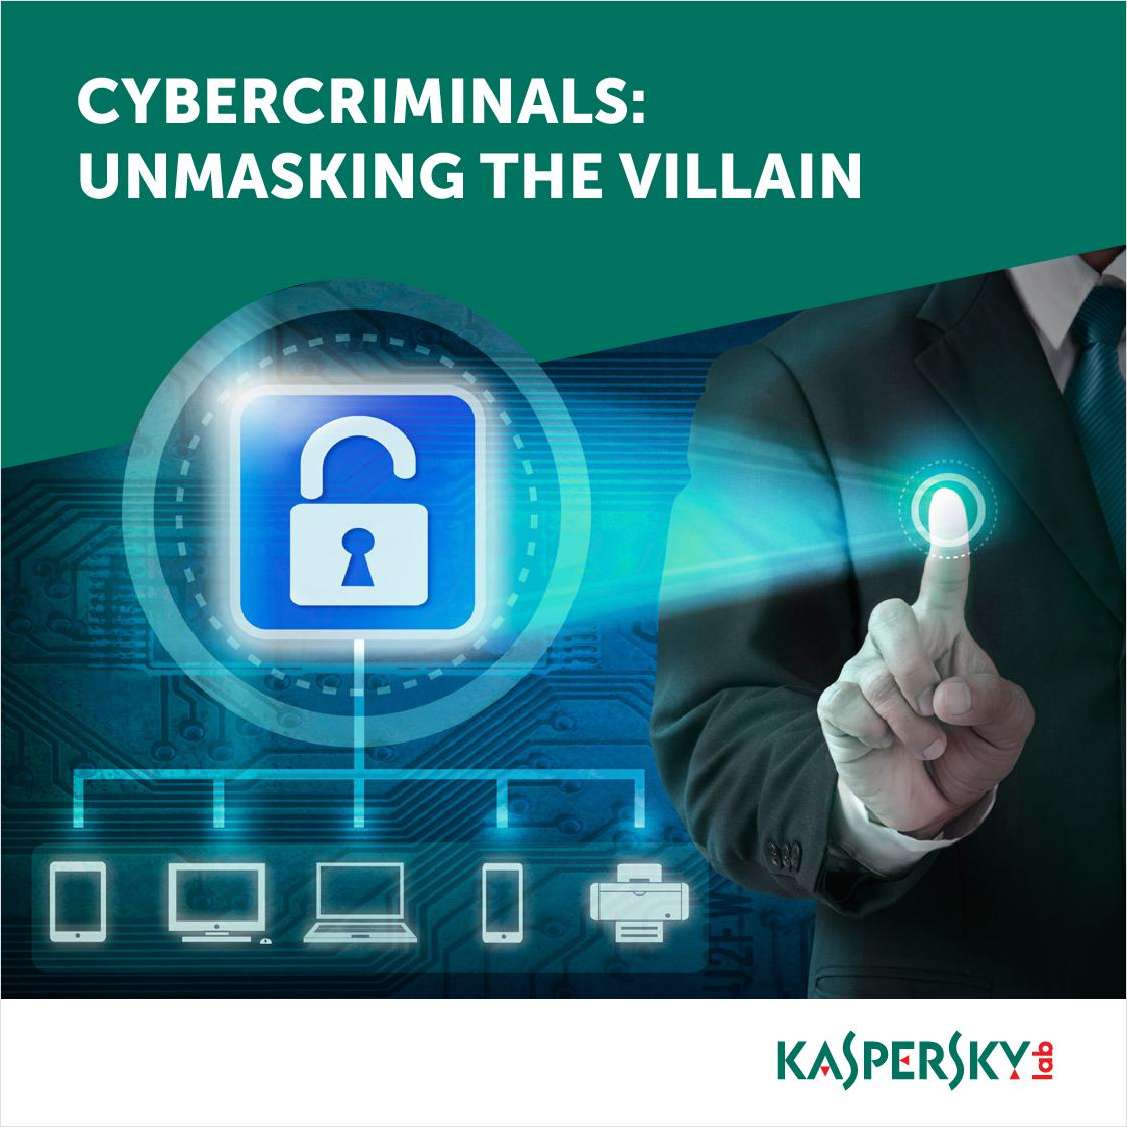 Lifting the Veil of Secrecy on Cybercriminals